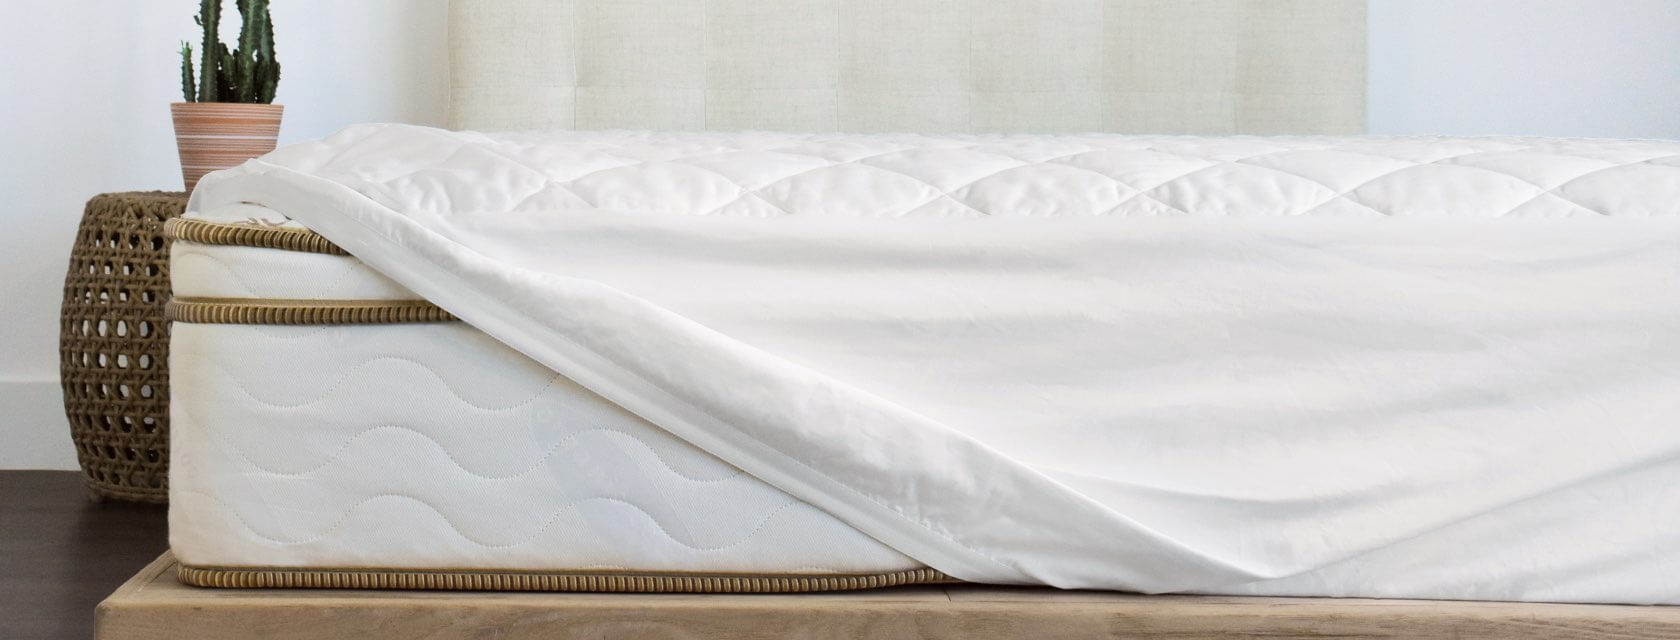 SINGLE PREMIUM FITTED MATTRESS TOPPER COTTON COVER CASE RRP $285 